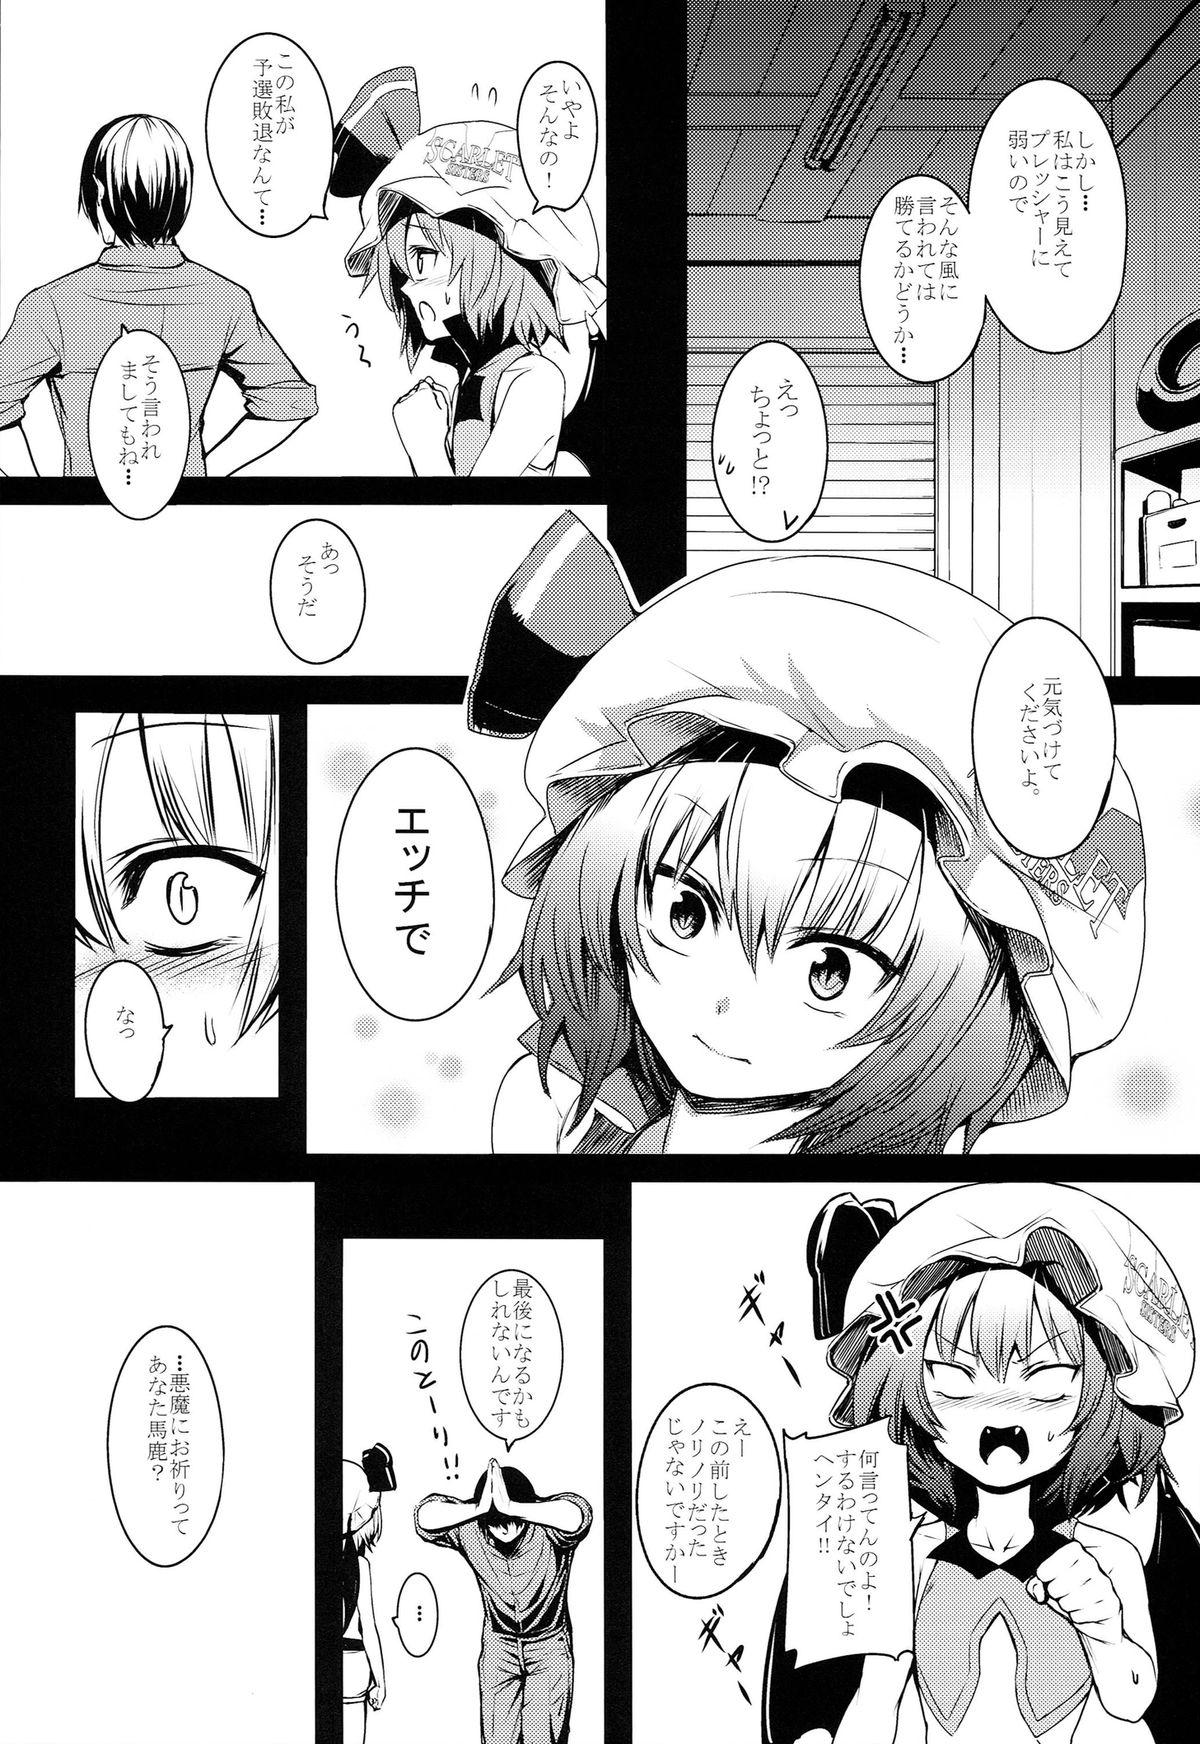 Gaypawn TOUHOU RACE QUEENS COLLABO CLUB - Touhou project Freak - Page 5